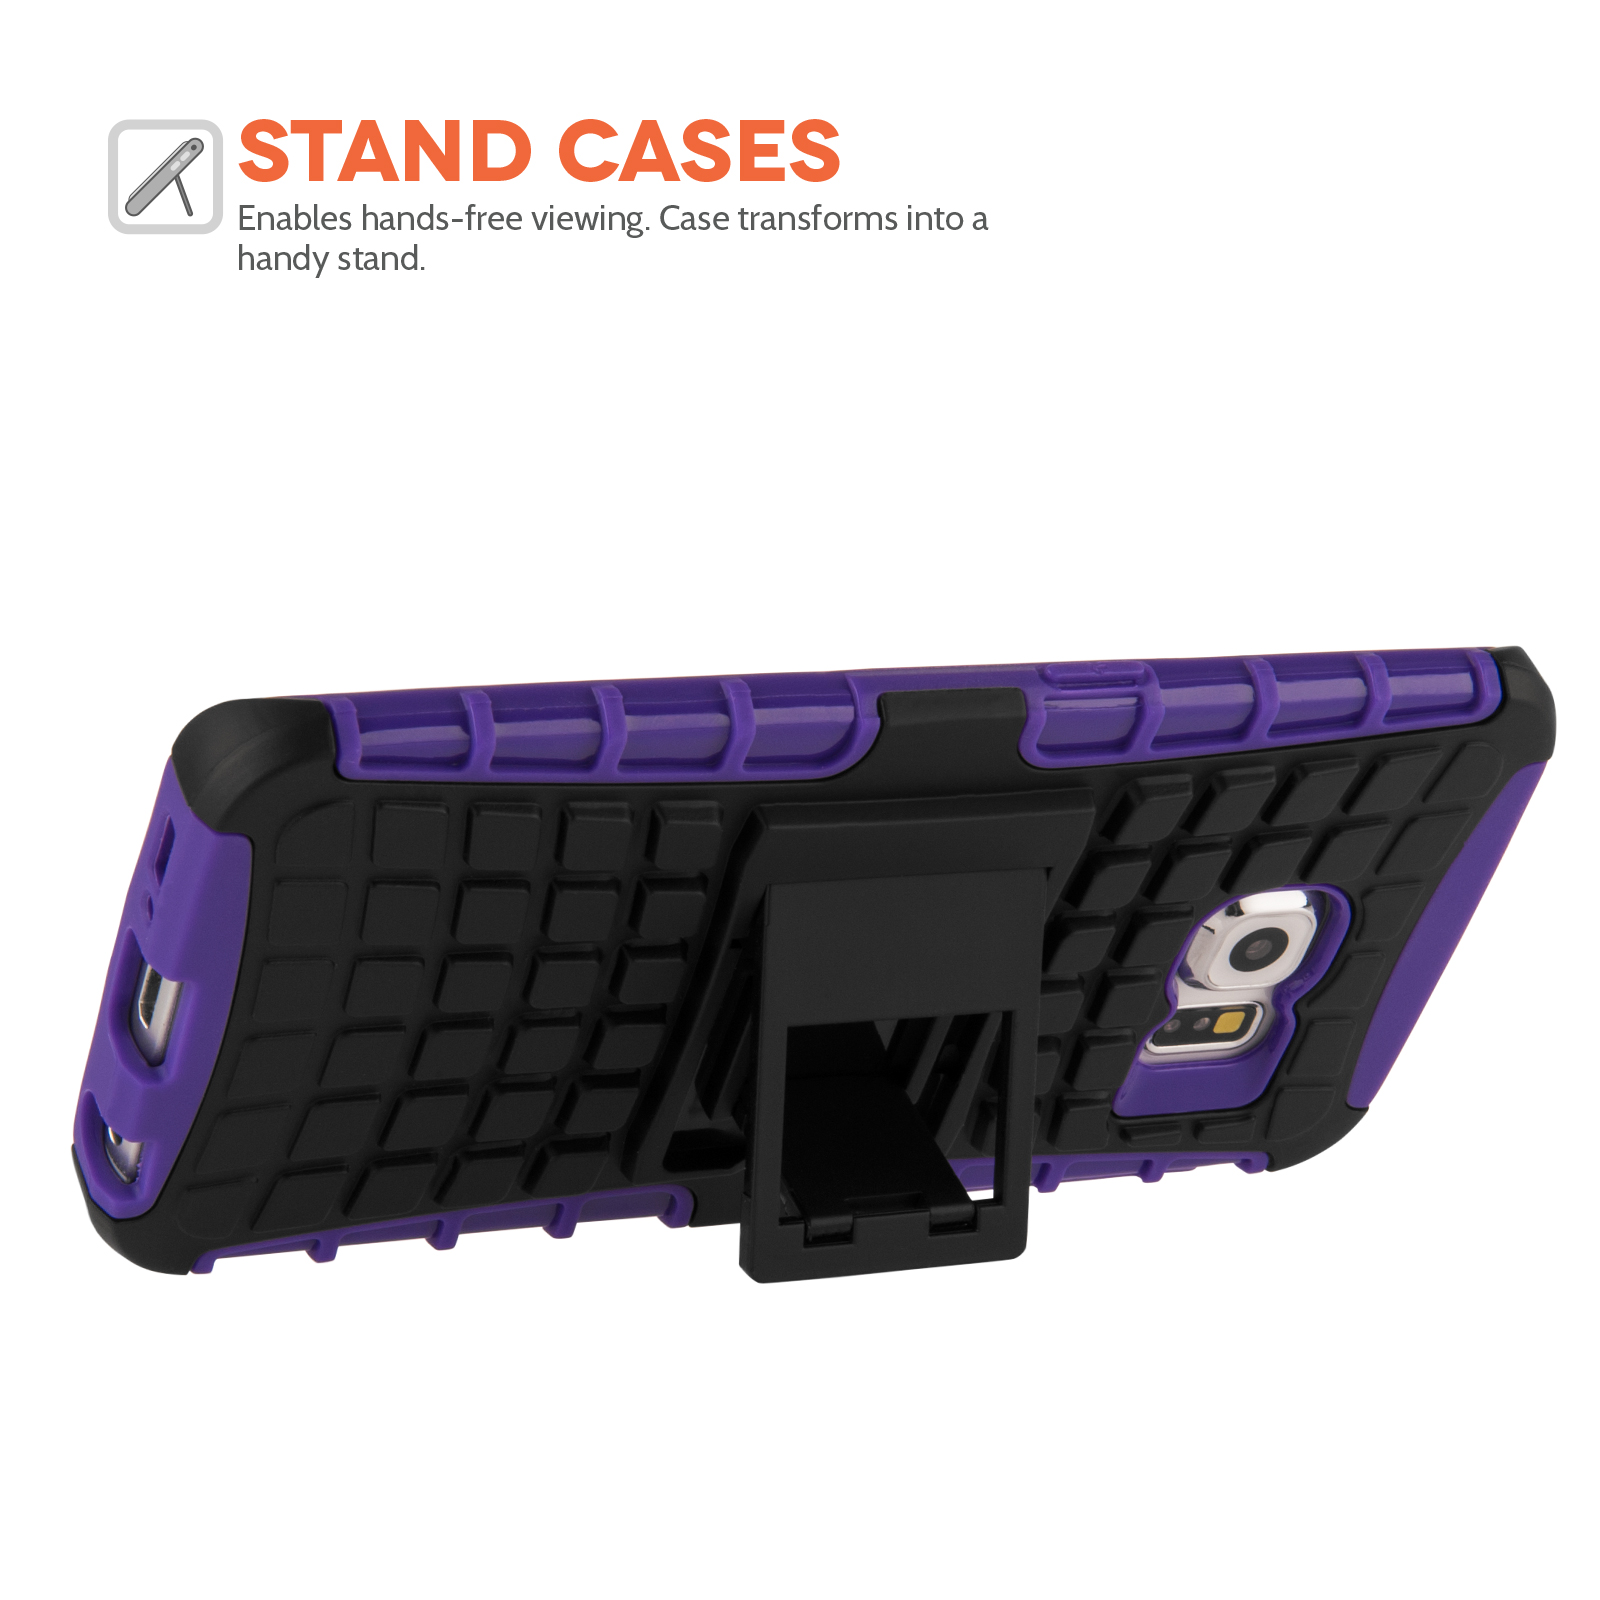 YouSave Accessories Samsung Galaxy S6 Edge Stand Combo Case - Purple